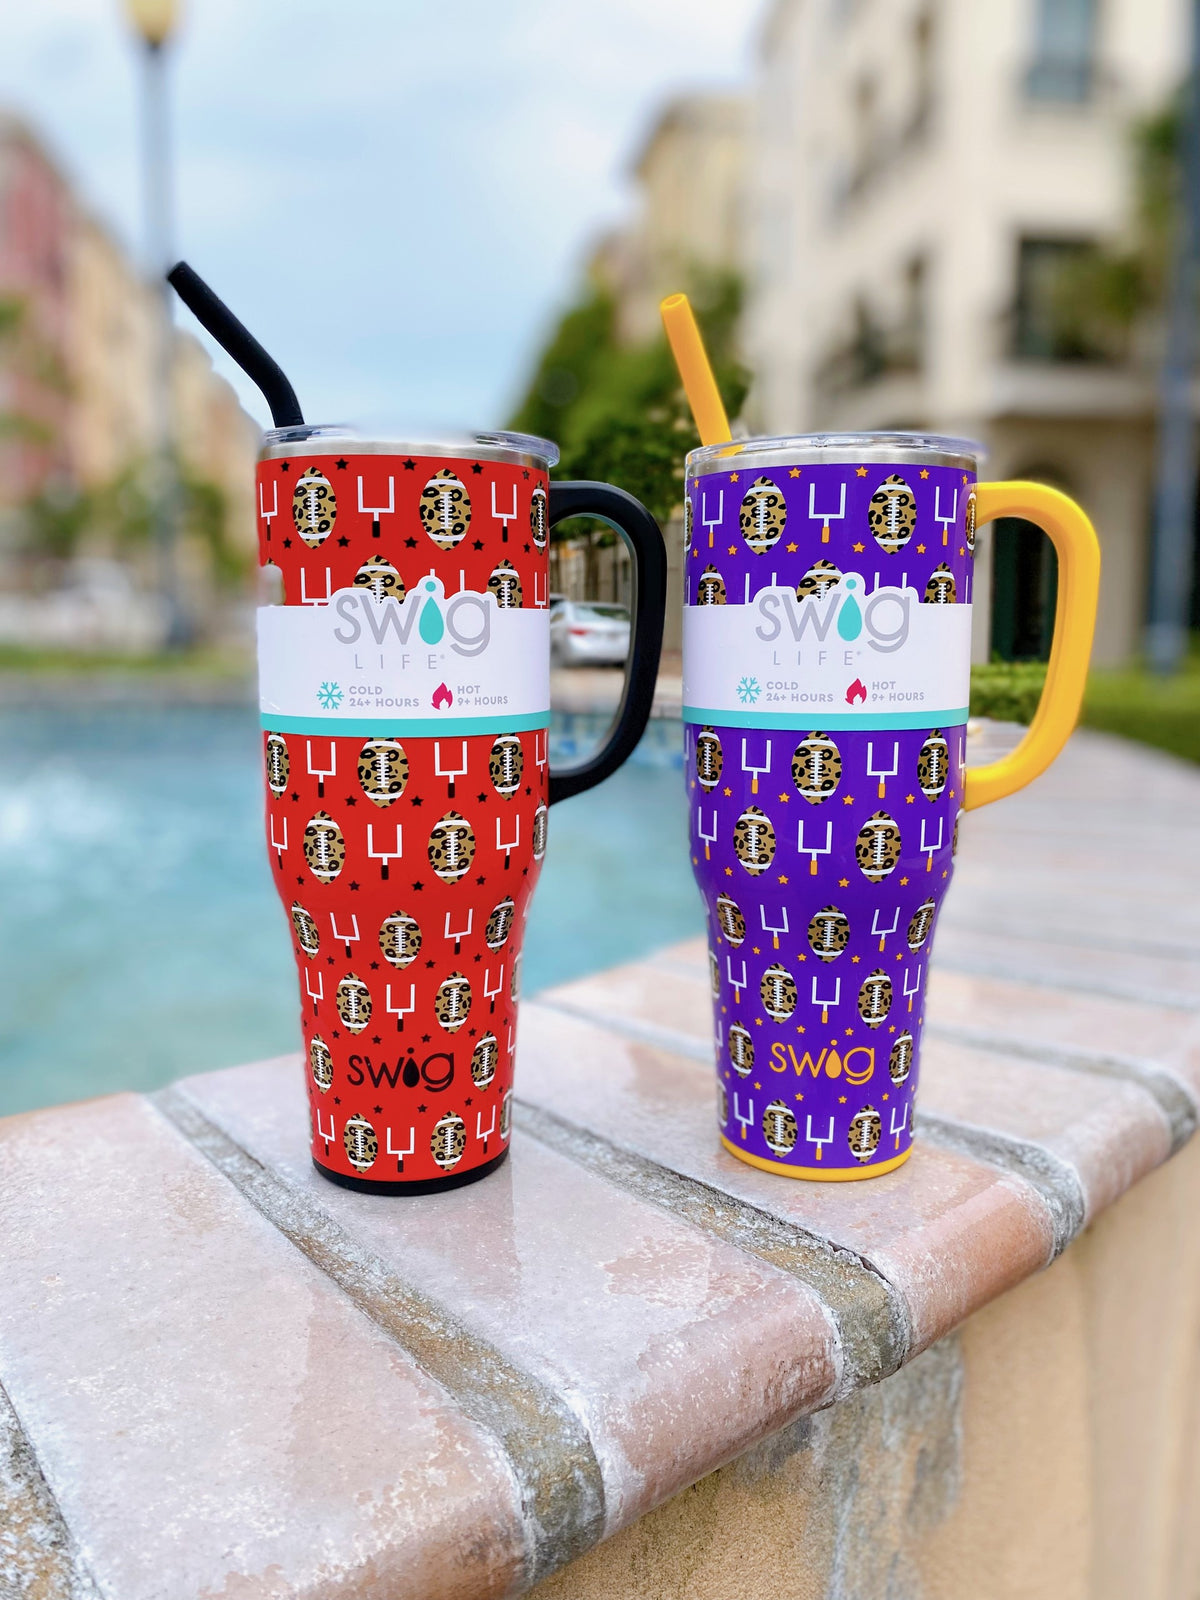 https://www.shopcarolineandco.shop/wp-content/uploads/1692/97/explore-swig-40-oz-mega-mug-touchdown-purple-gold-swig-and-many-more-shop-for-less-in-our-store_1.jpg